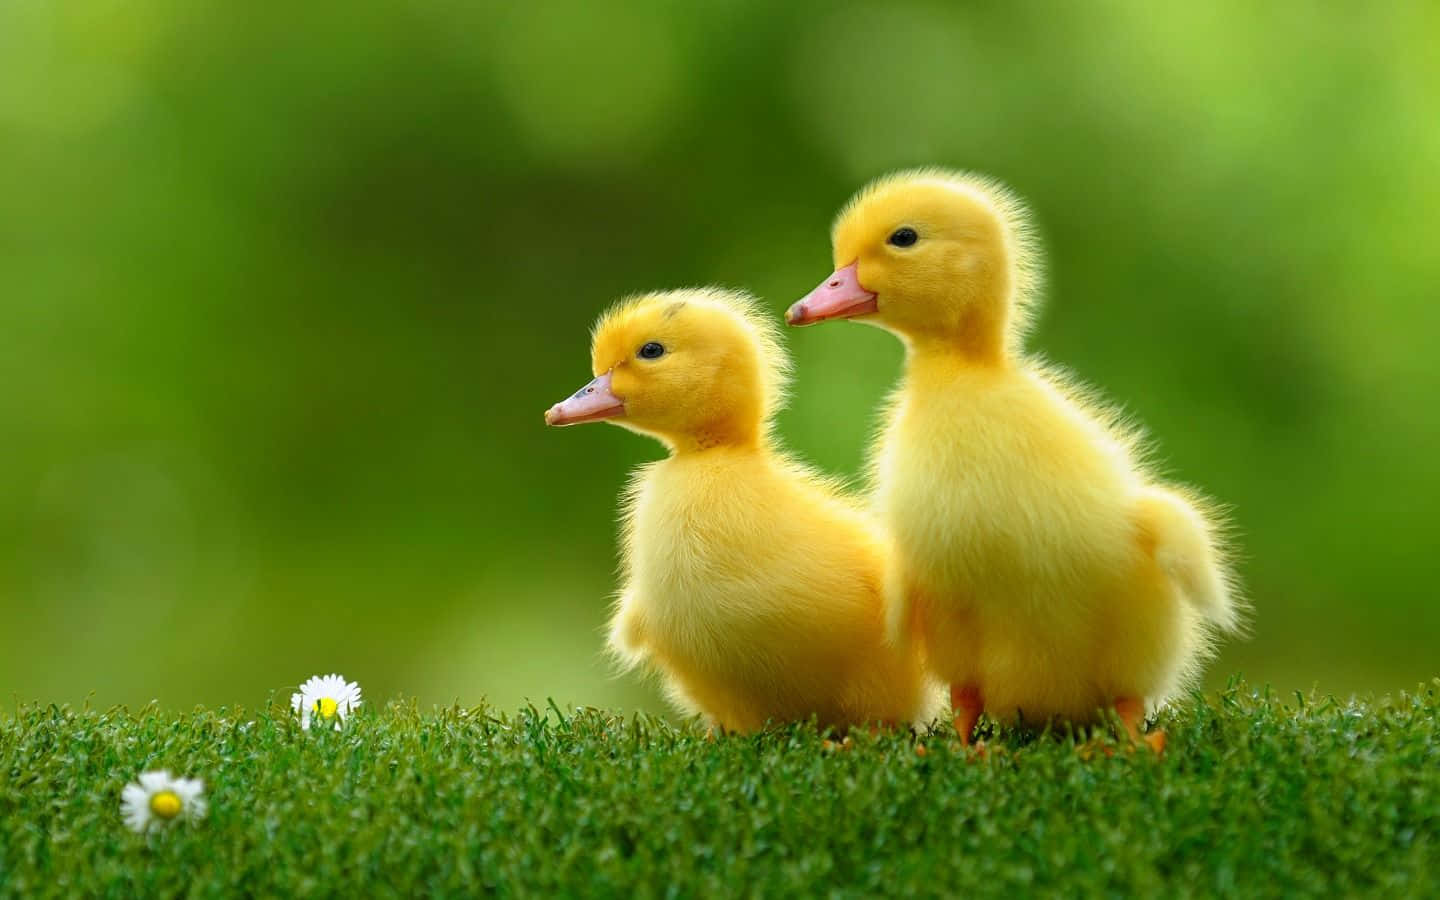 Look At This Adorable Cute Duck! Wallpaper